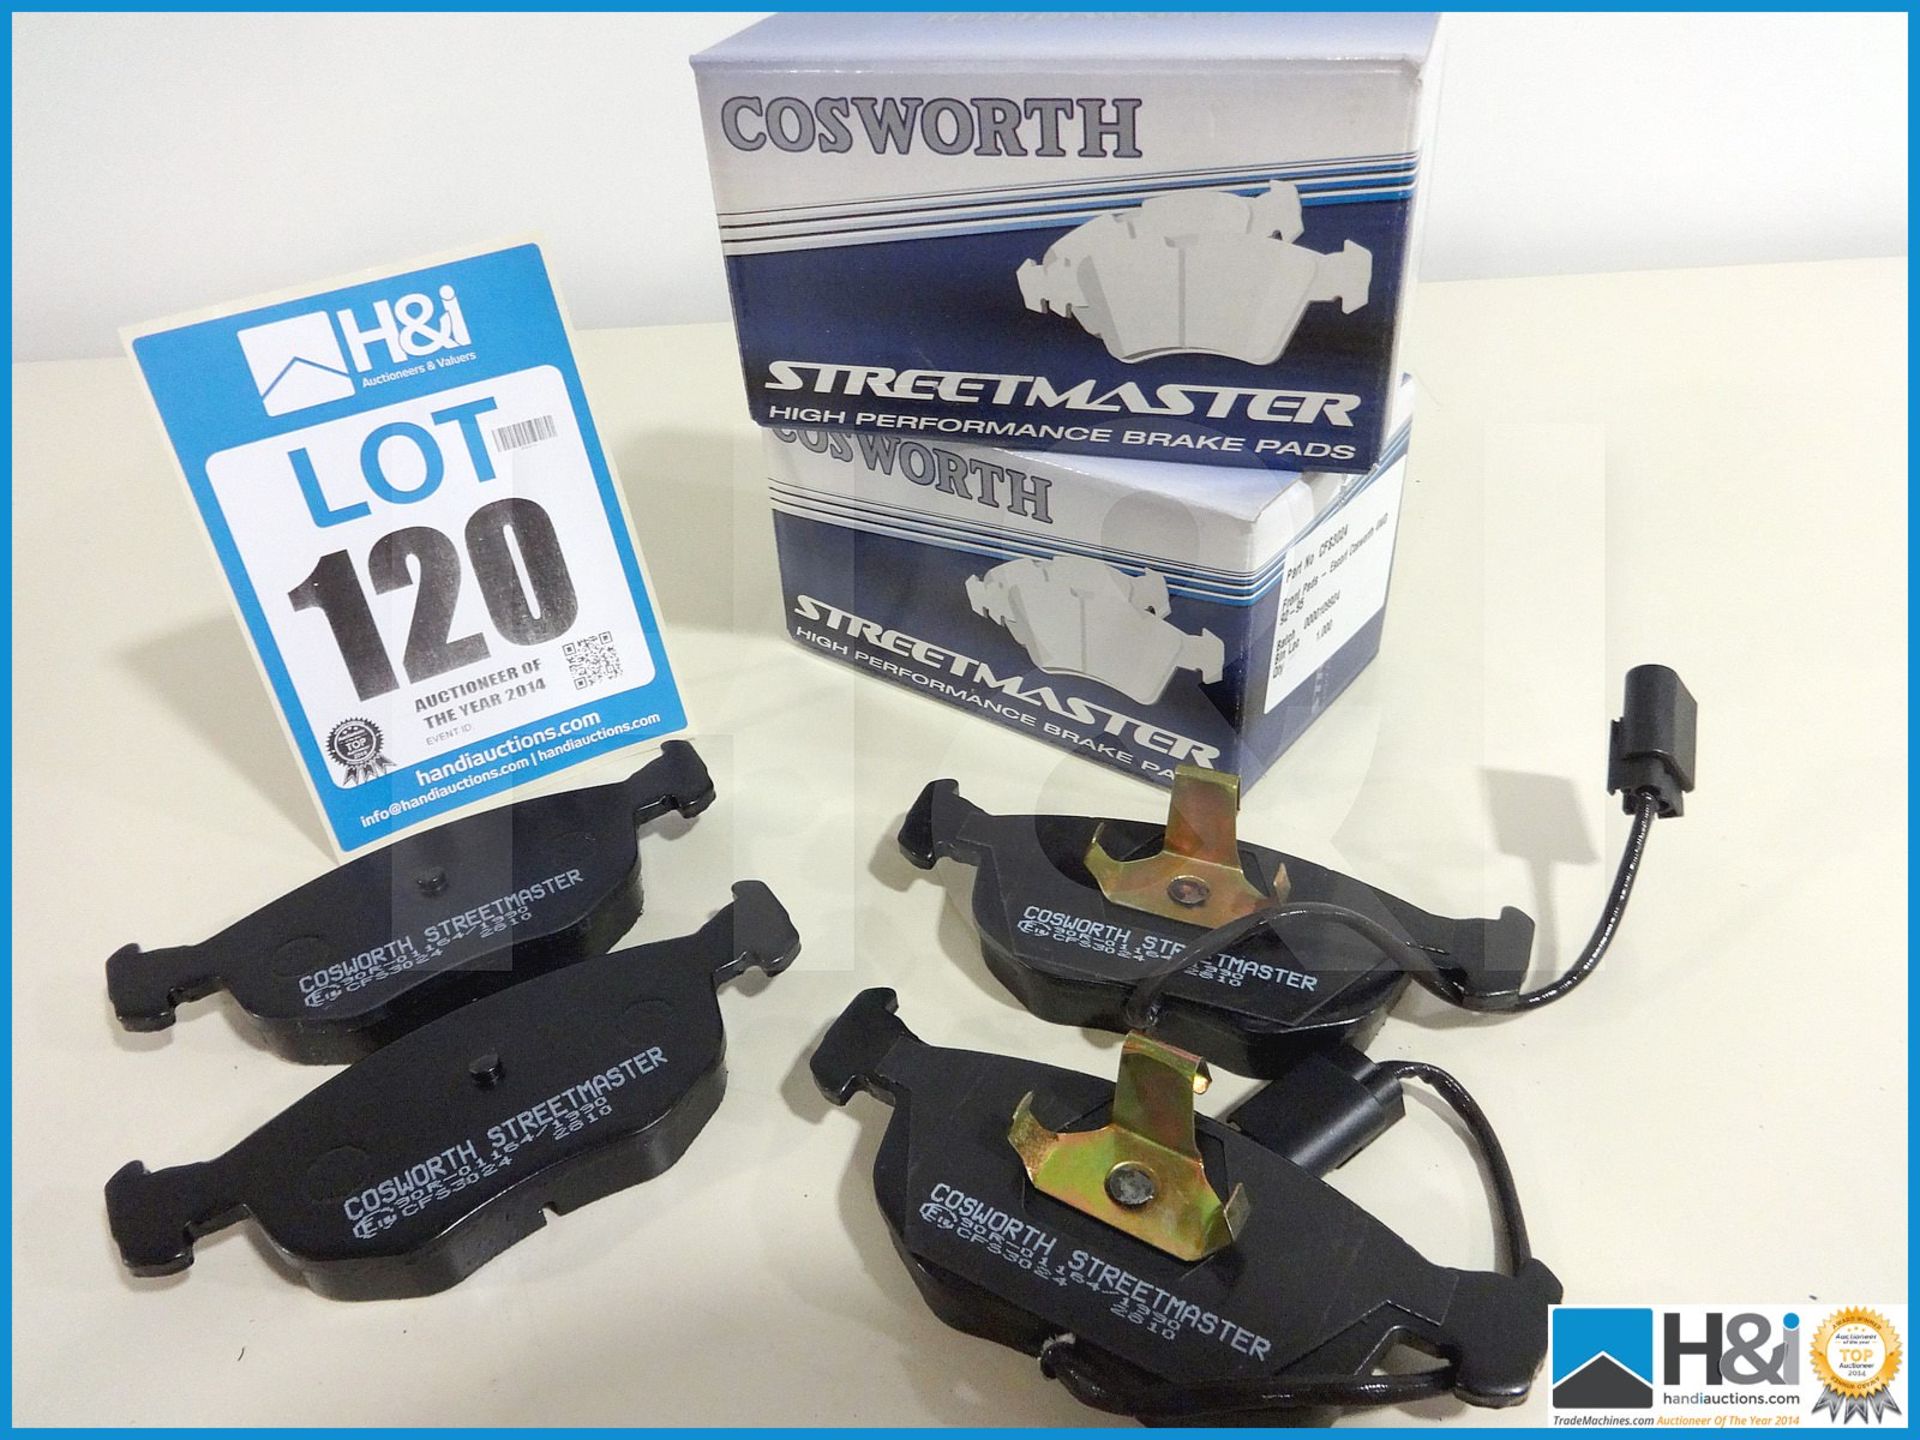 10 off Escort Cosworth 4WD 92-95 front brake pads. New and boxed. MC: CFS3024 CILN: 14